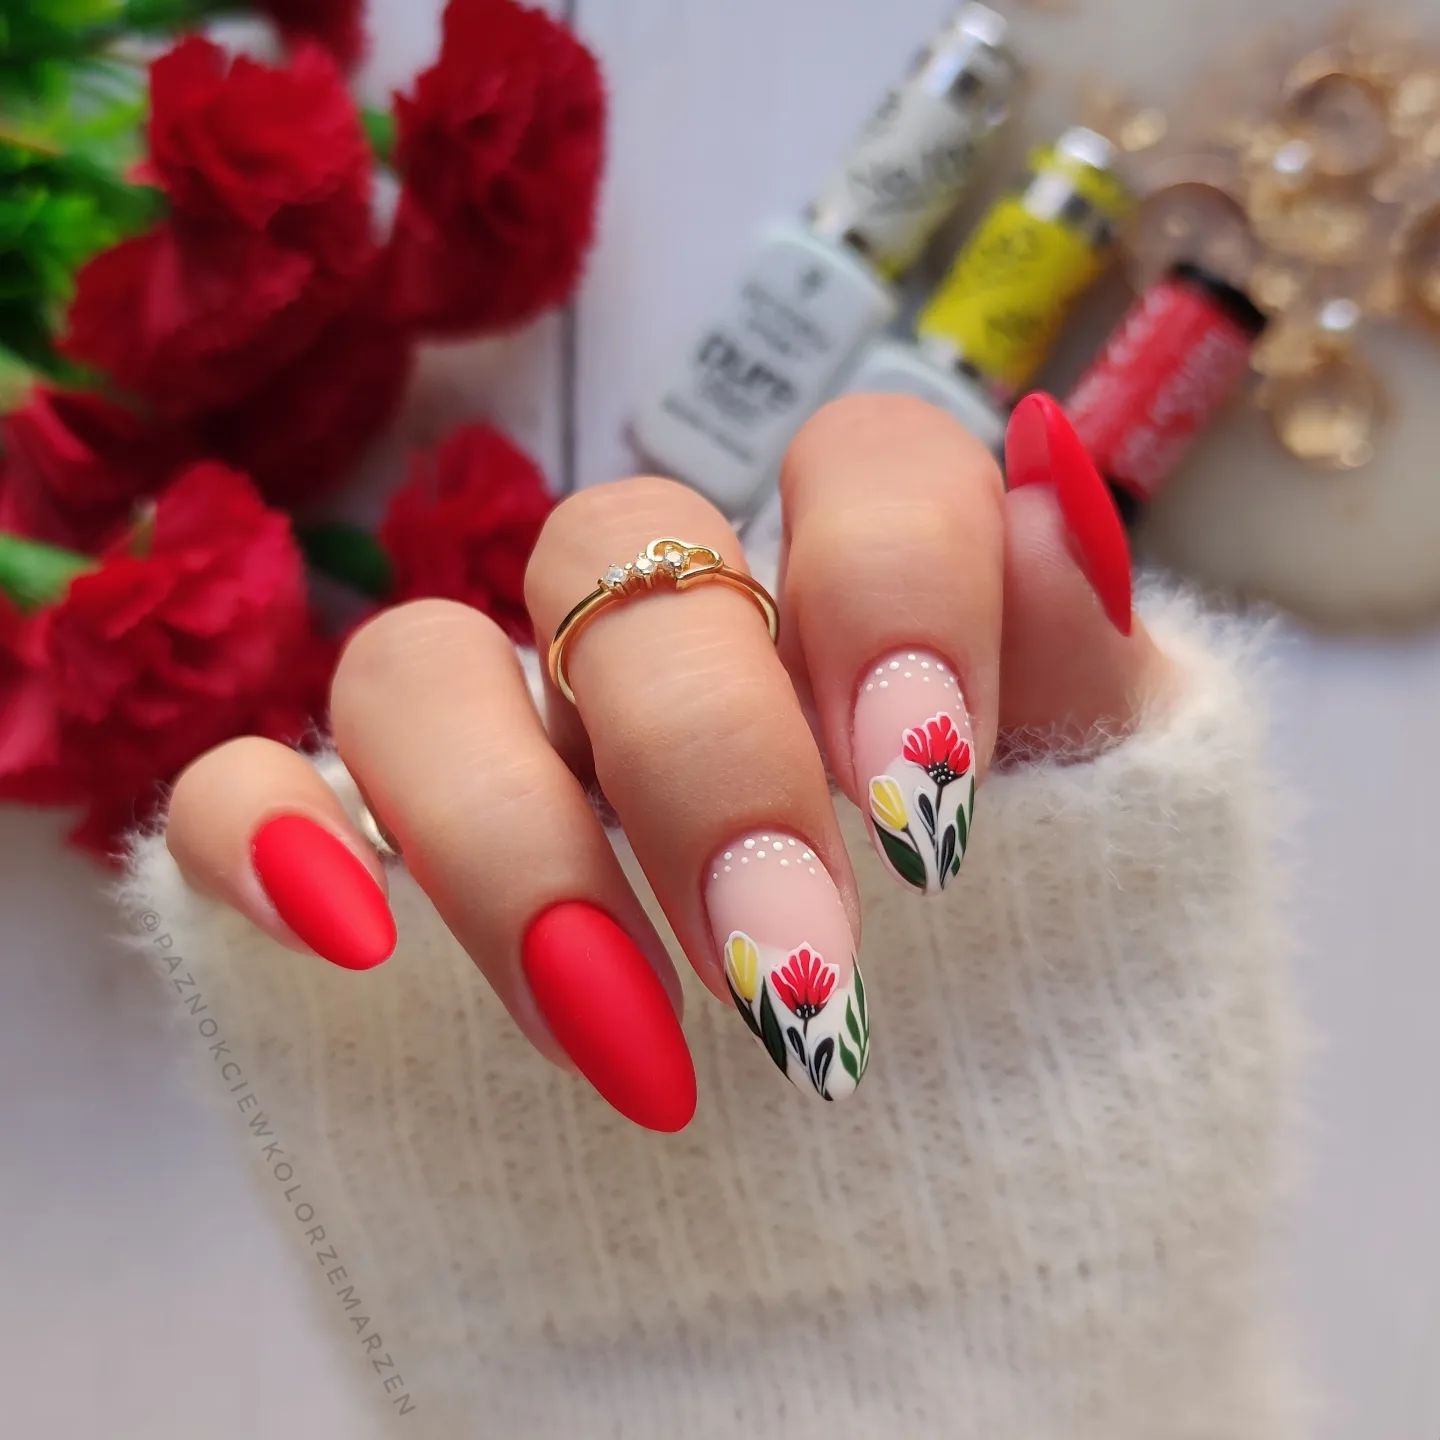 Long Matte Red Nails with Floral Design